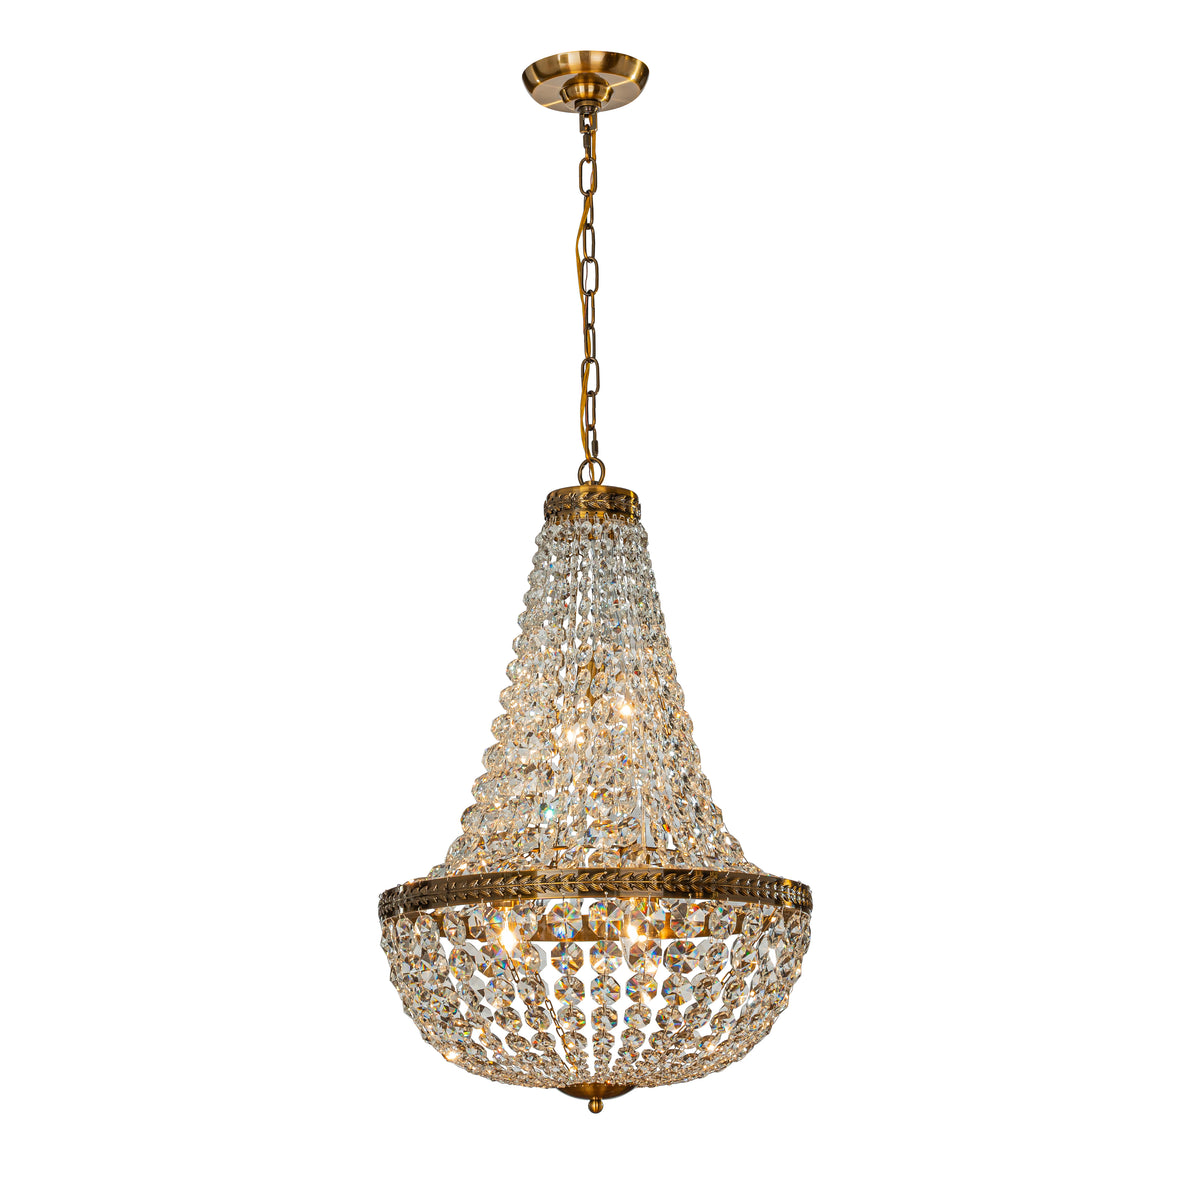 OPEN BOX-4-Light W 18 in. Vintage And Glam Crystal Basket Chandelier in Antique Gold